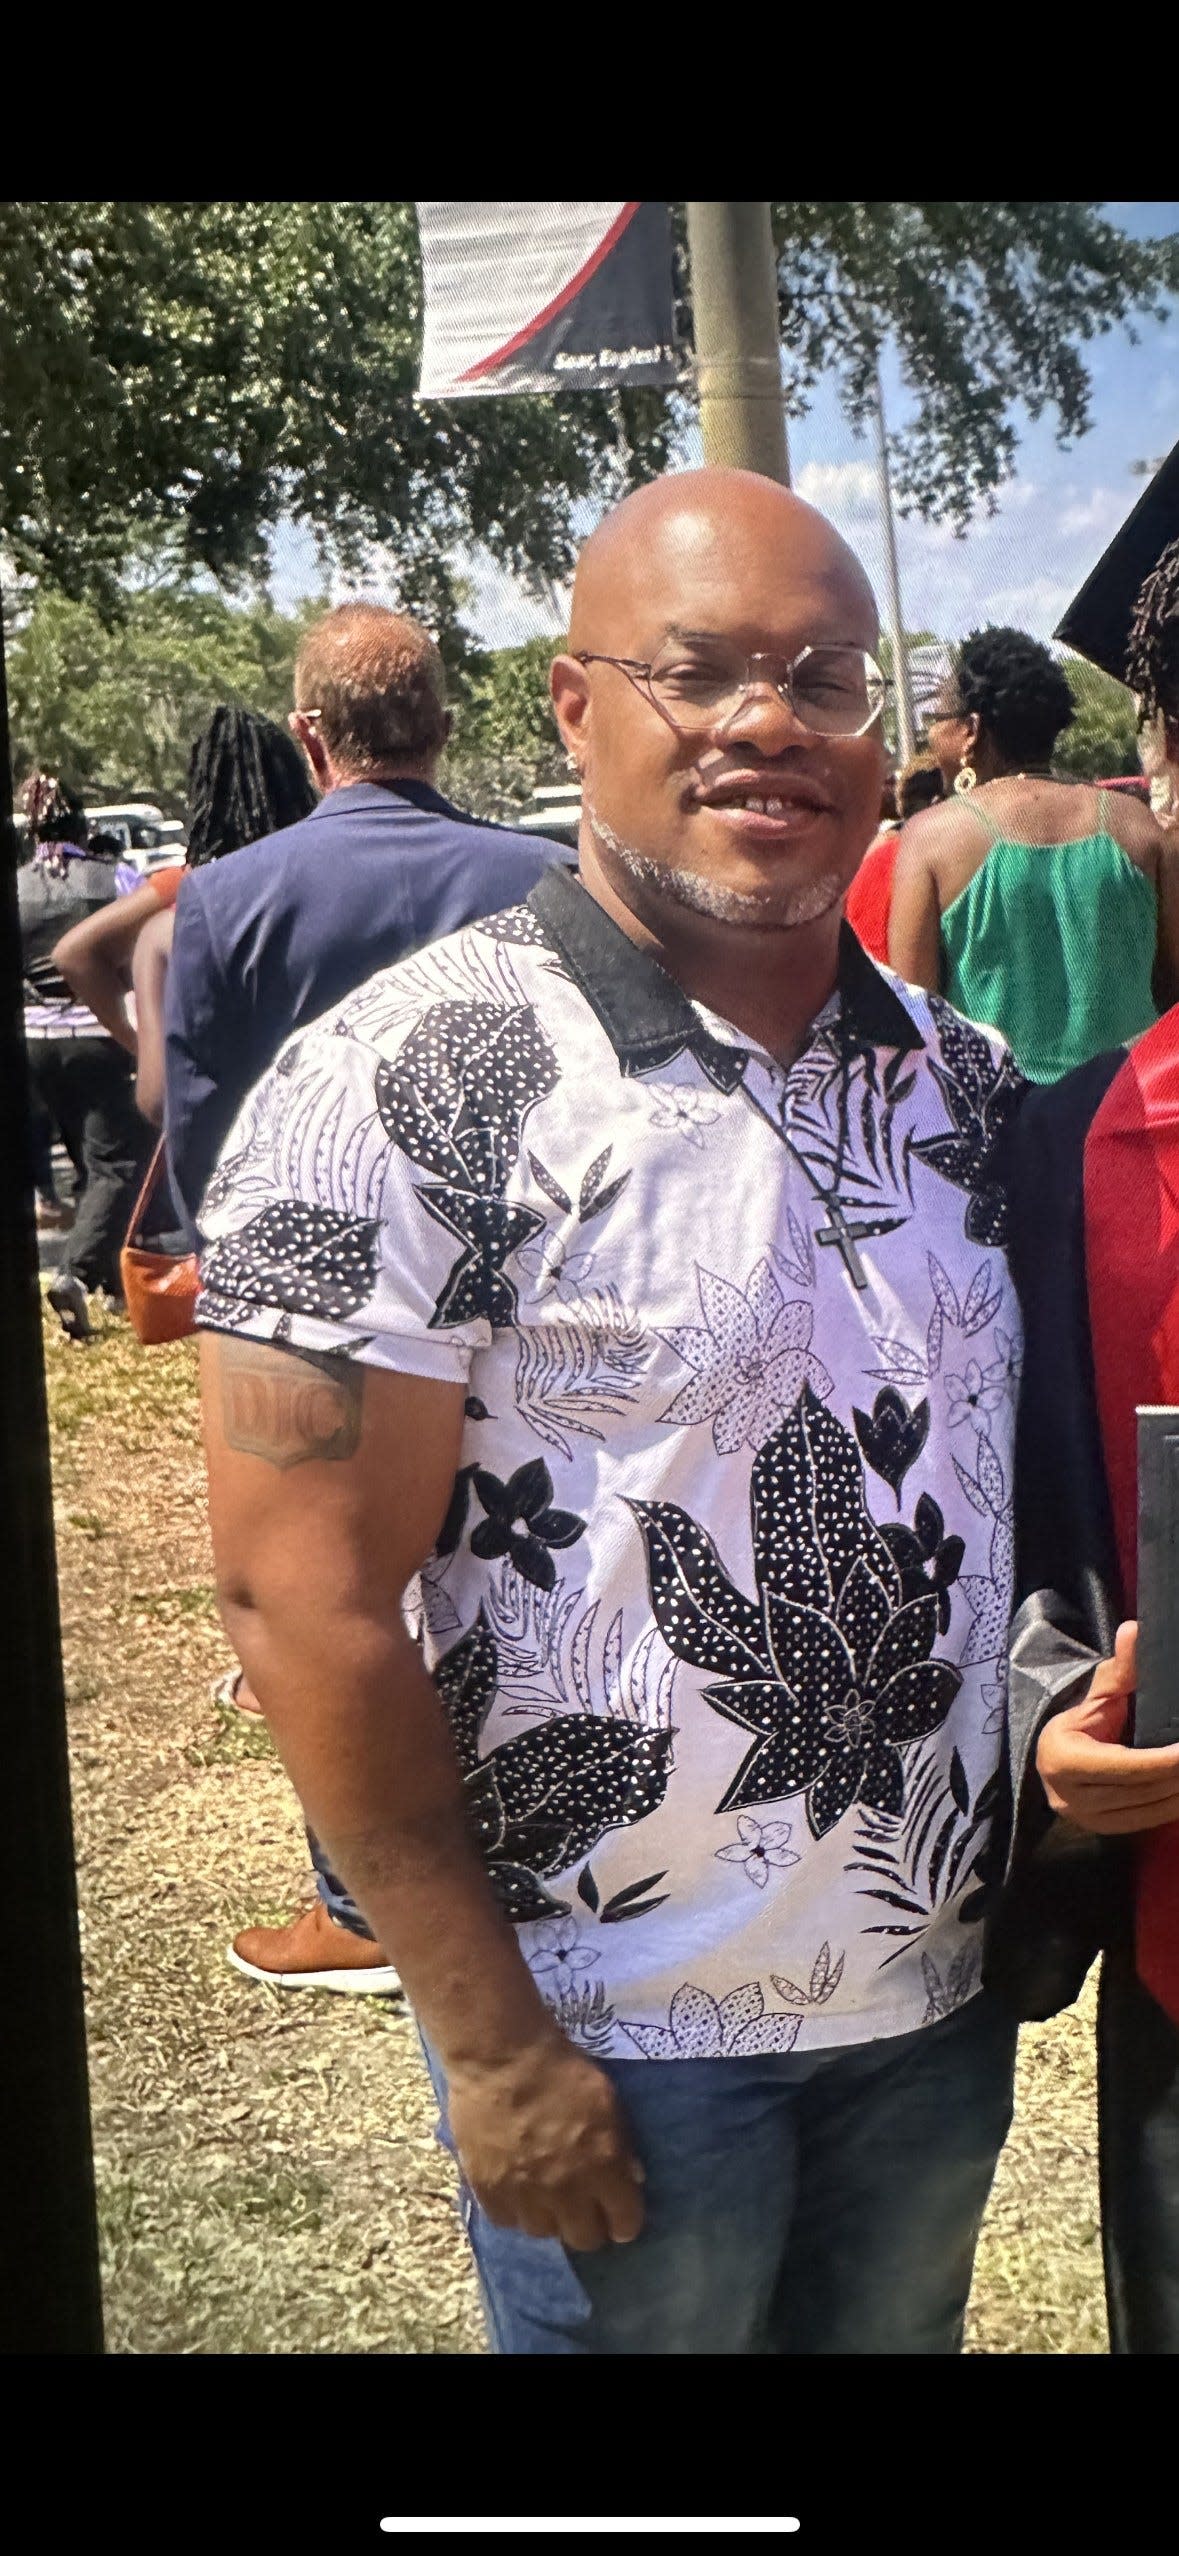 Lakeland police say Duane Custer has been missing since May 11. He was last seen in the 3000 block of Covington Lane in Lakeland. A Florida Purple Alert has been issued.